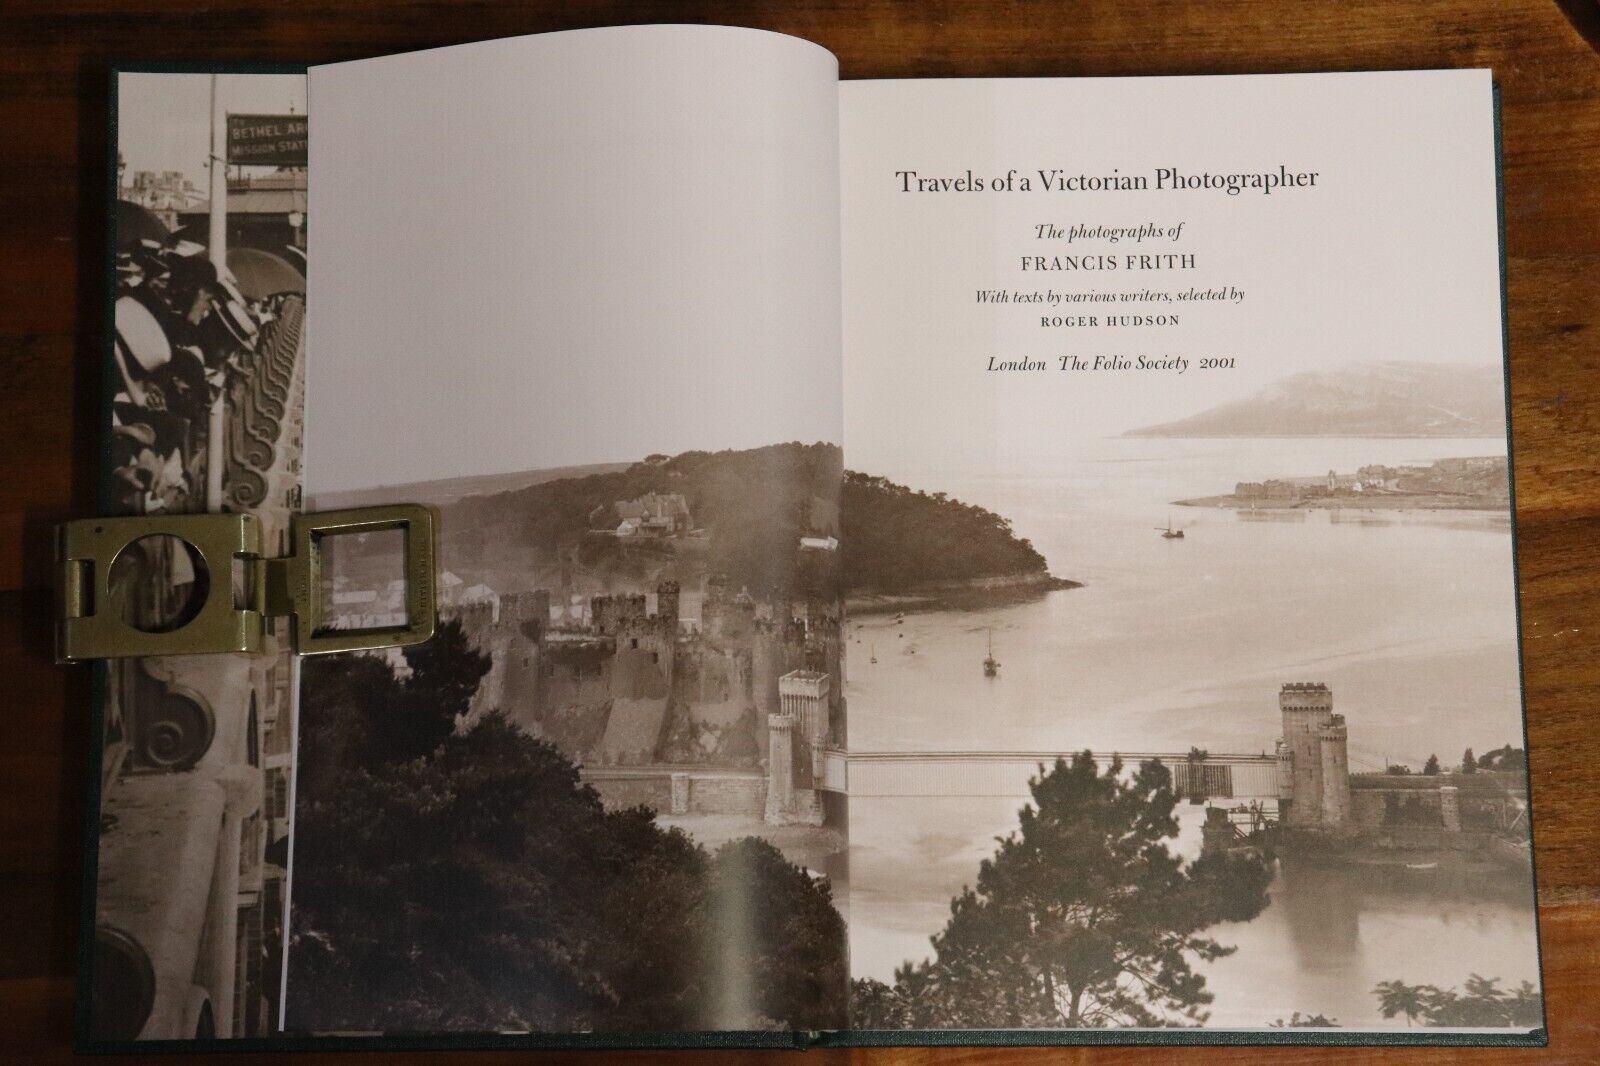 Travels Of A Victorian Photographer - 2001 - Folio Society - History Book - 0